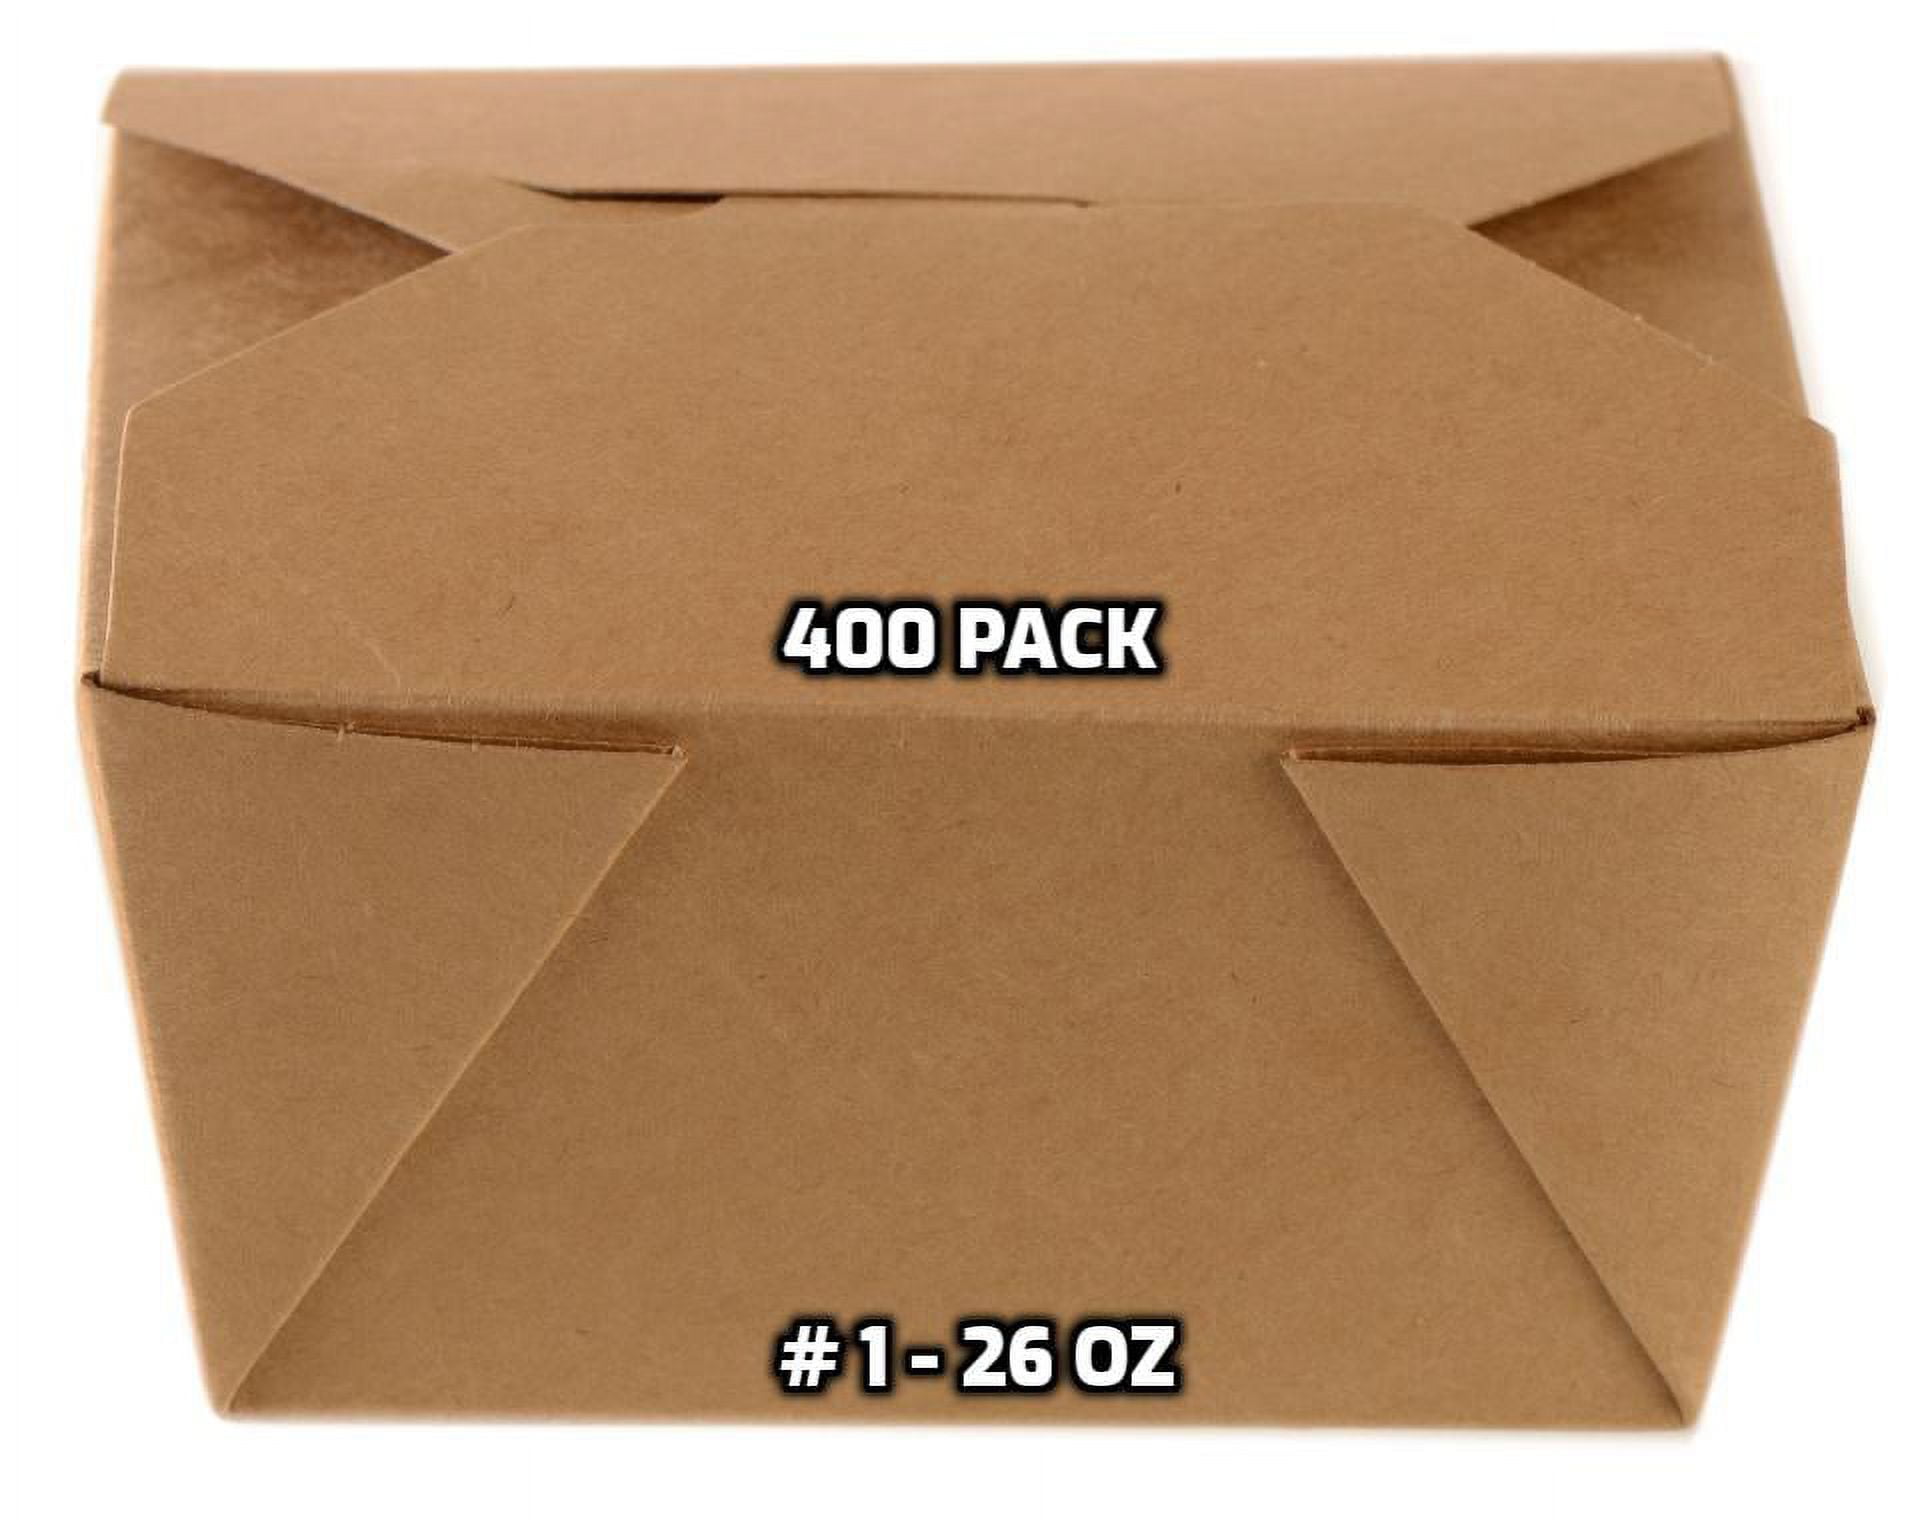 Takeout Containers (Fiber or Paperboard) - Lawrence Berkeley